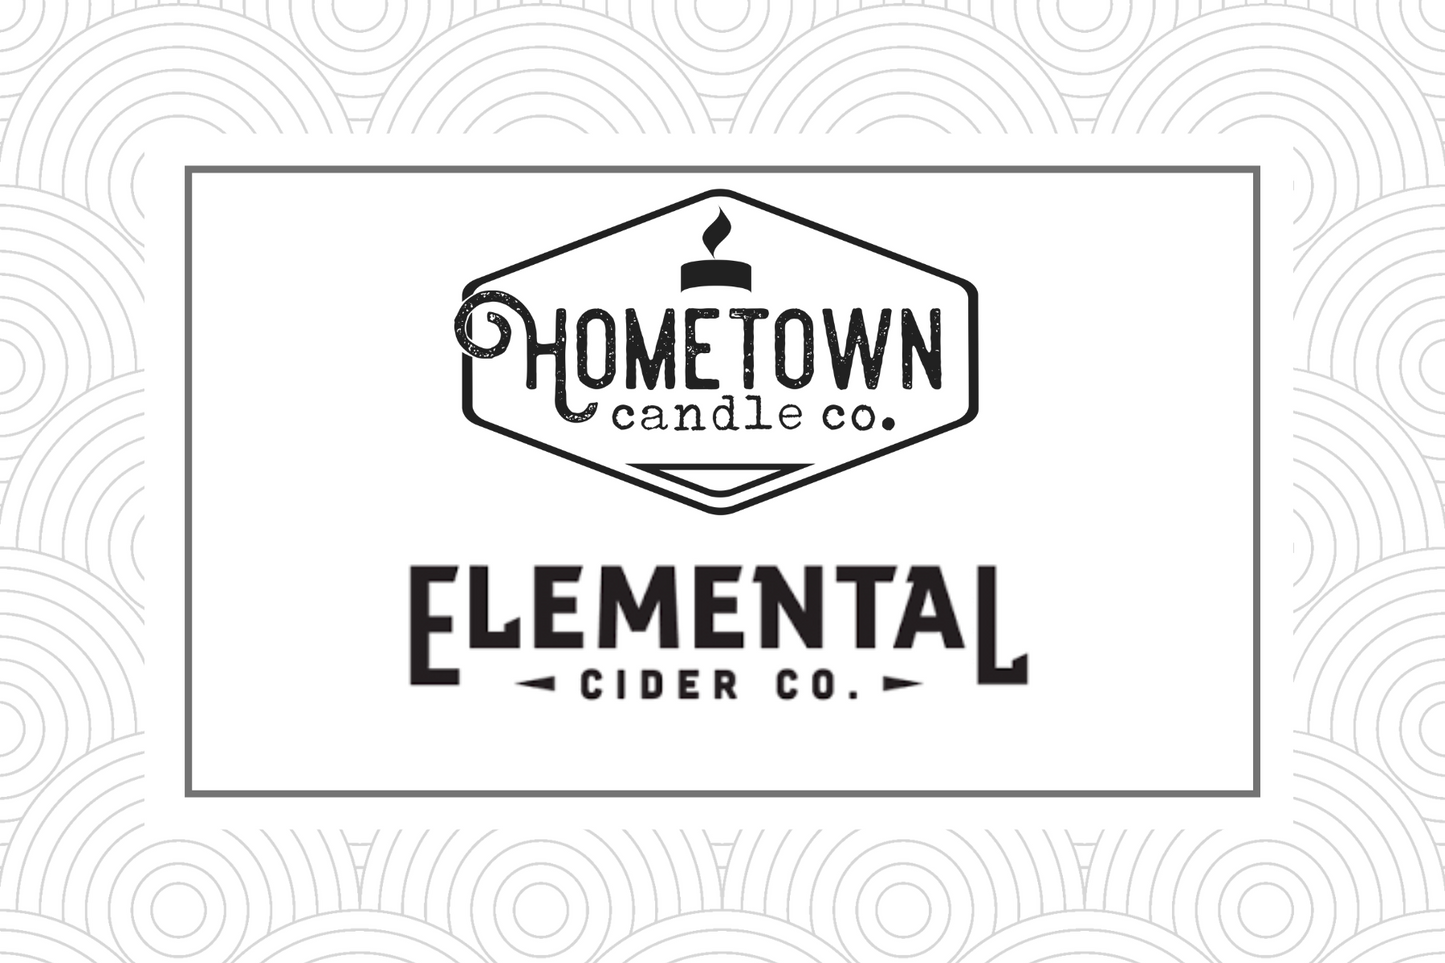 June 10th -  Sip & Pour - Candle Making at Elemental Cider